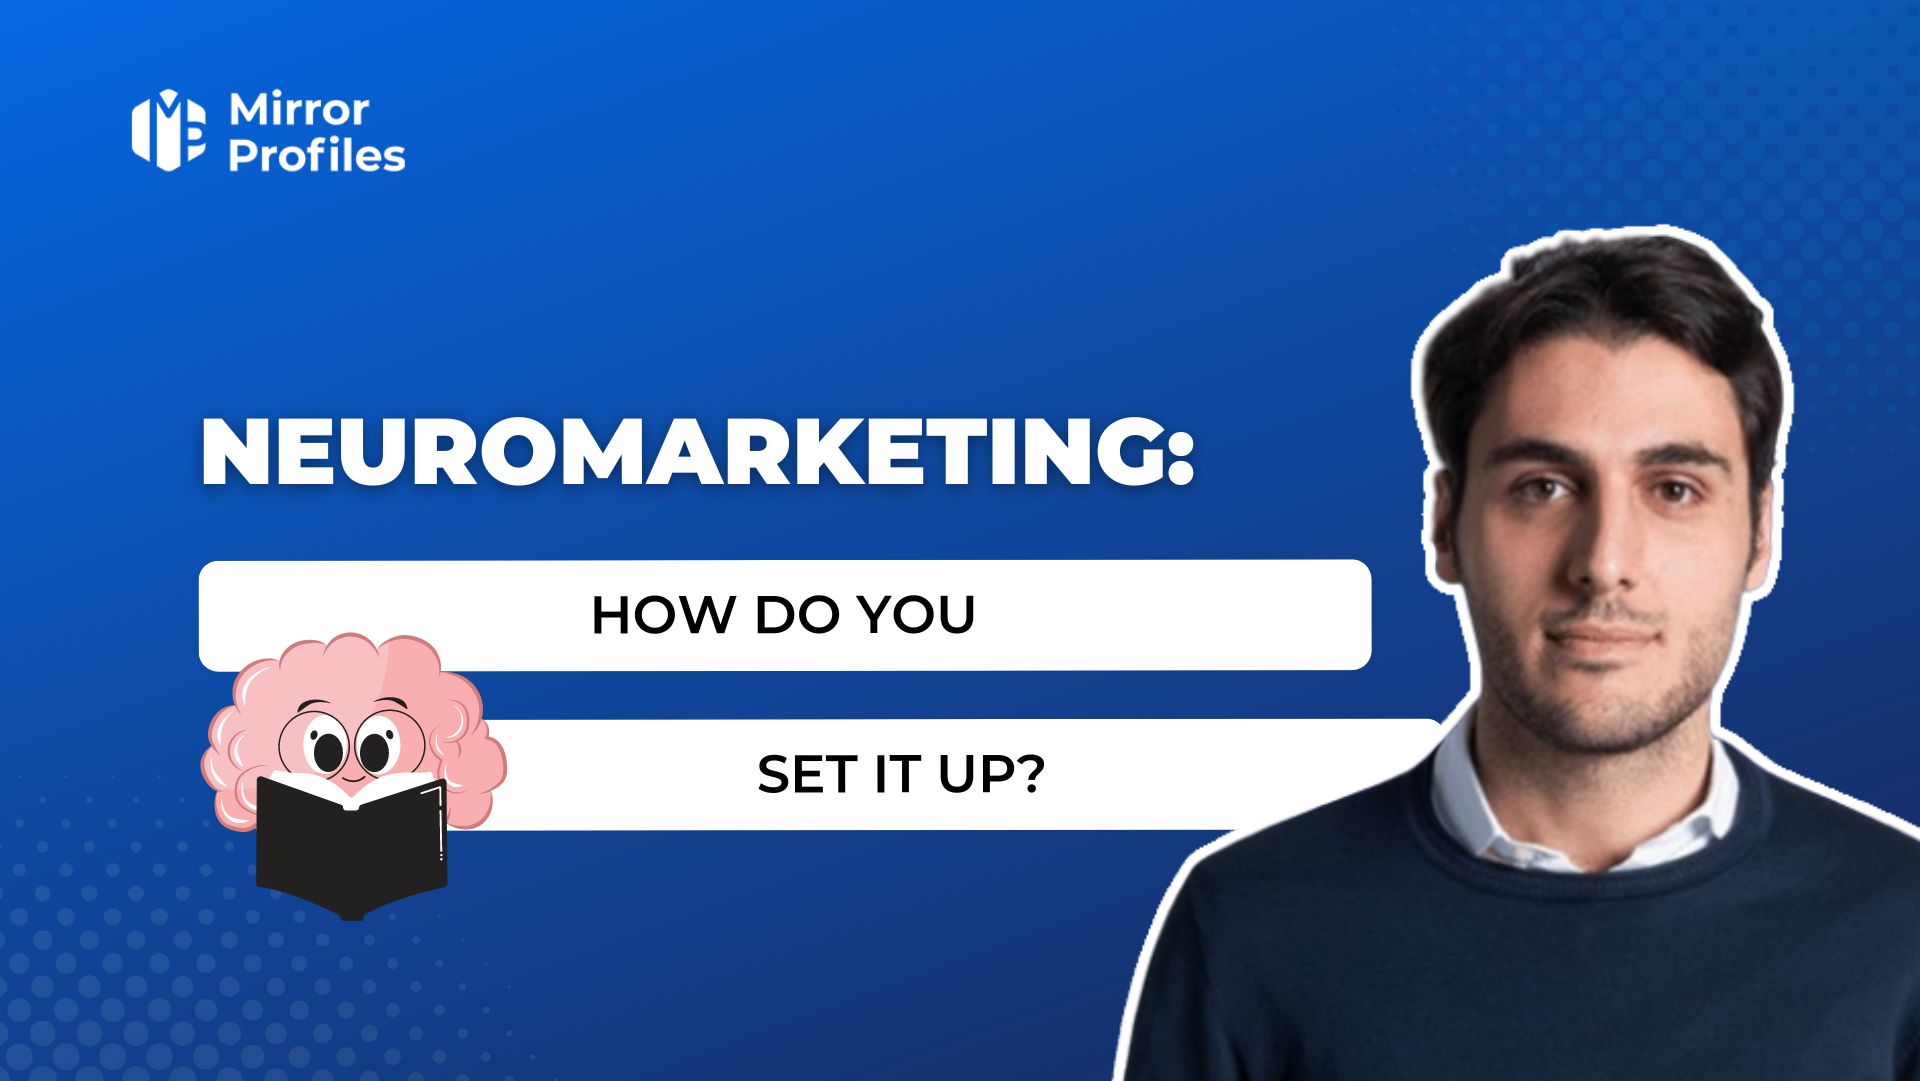 Neuromarketing: how do you set it up?